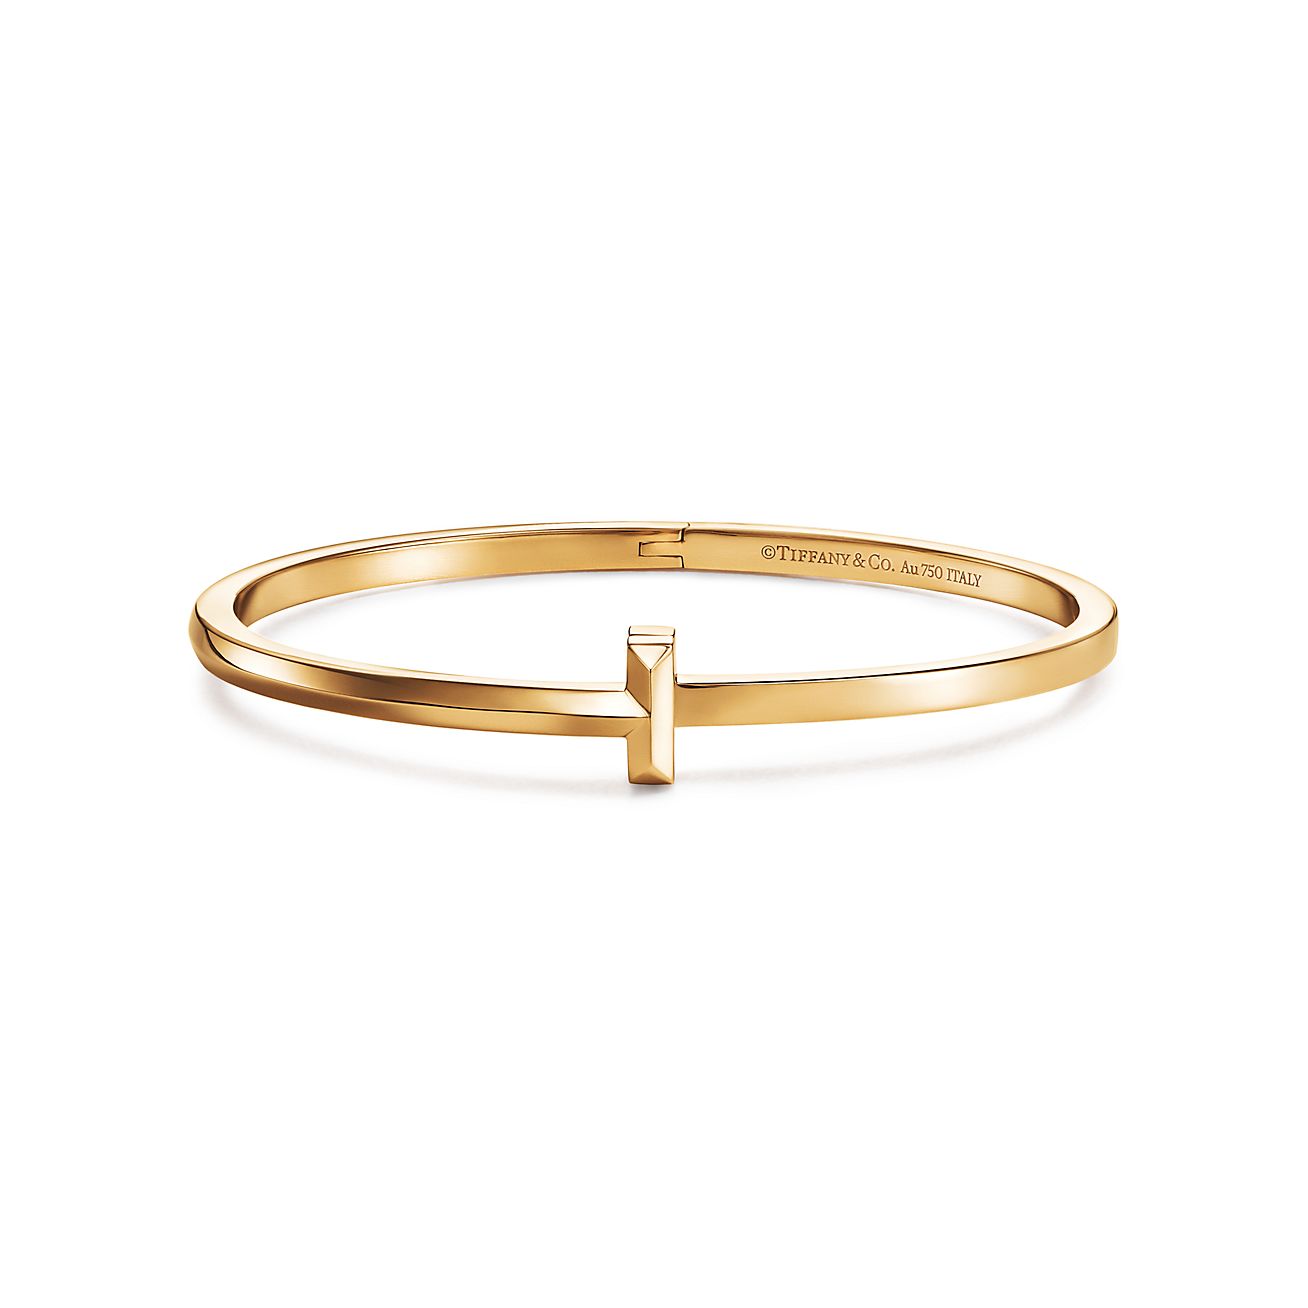 Elodi Gold Cuff Bracelet by Arms Of Eve Online | THE ICONIC | Australia